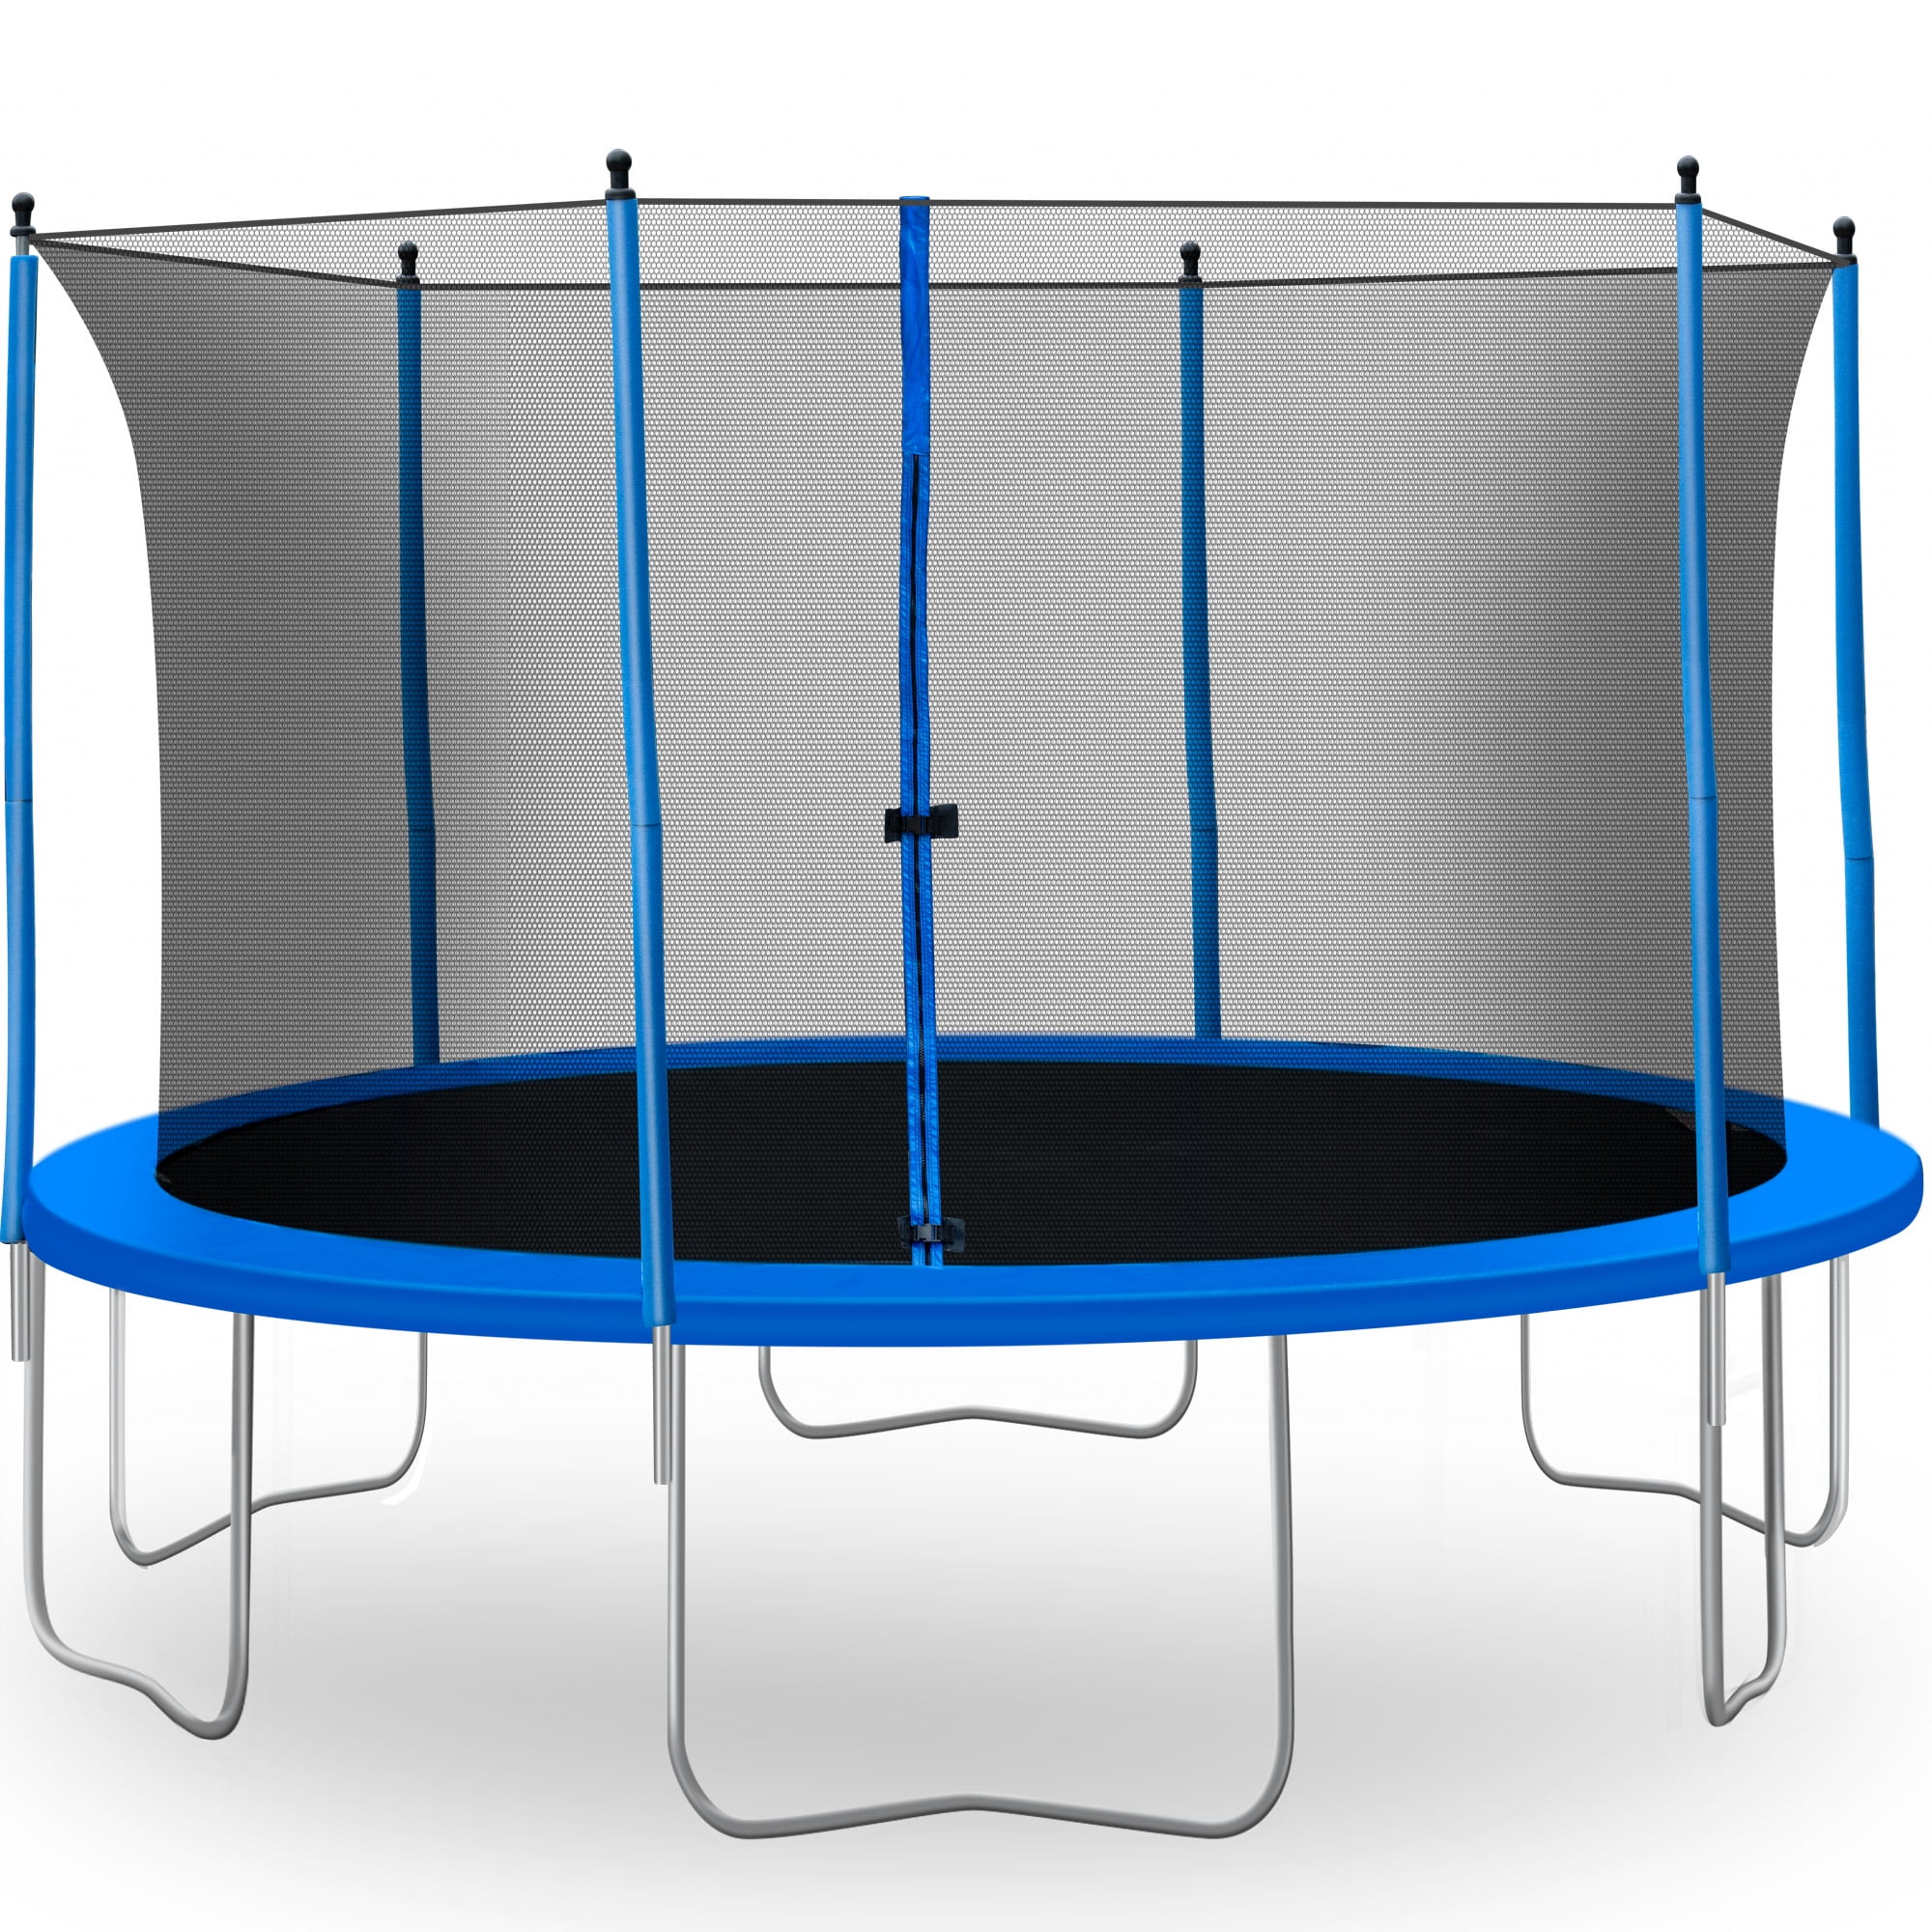 13 FT Outdoor Trampoline for Backyard, Outdoor Trampoline with Safety Enclosure Net, Steel Tube, Circular Trampolines for Adults/Kids, Family Jumping and Ladder, Kids Round Trampoline, Q17175